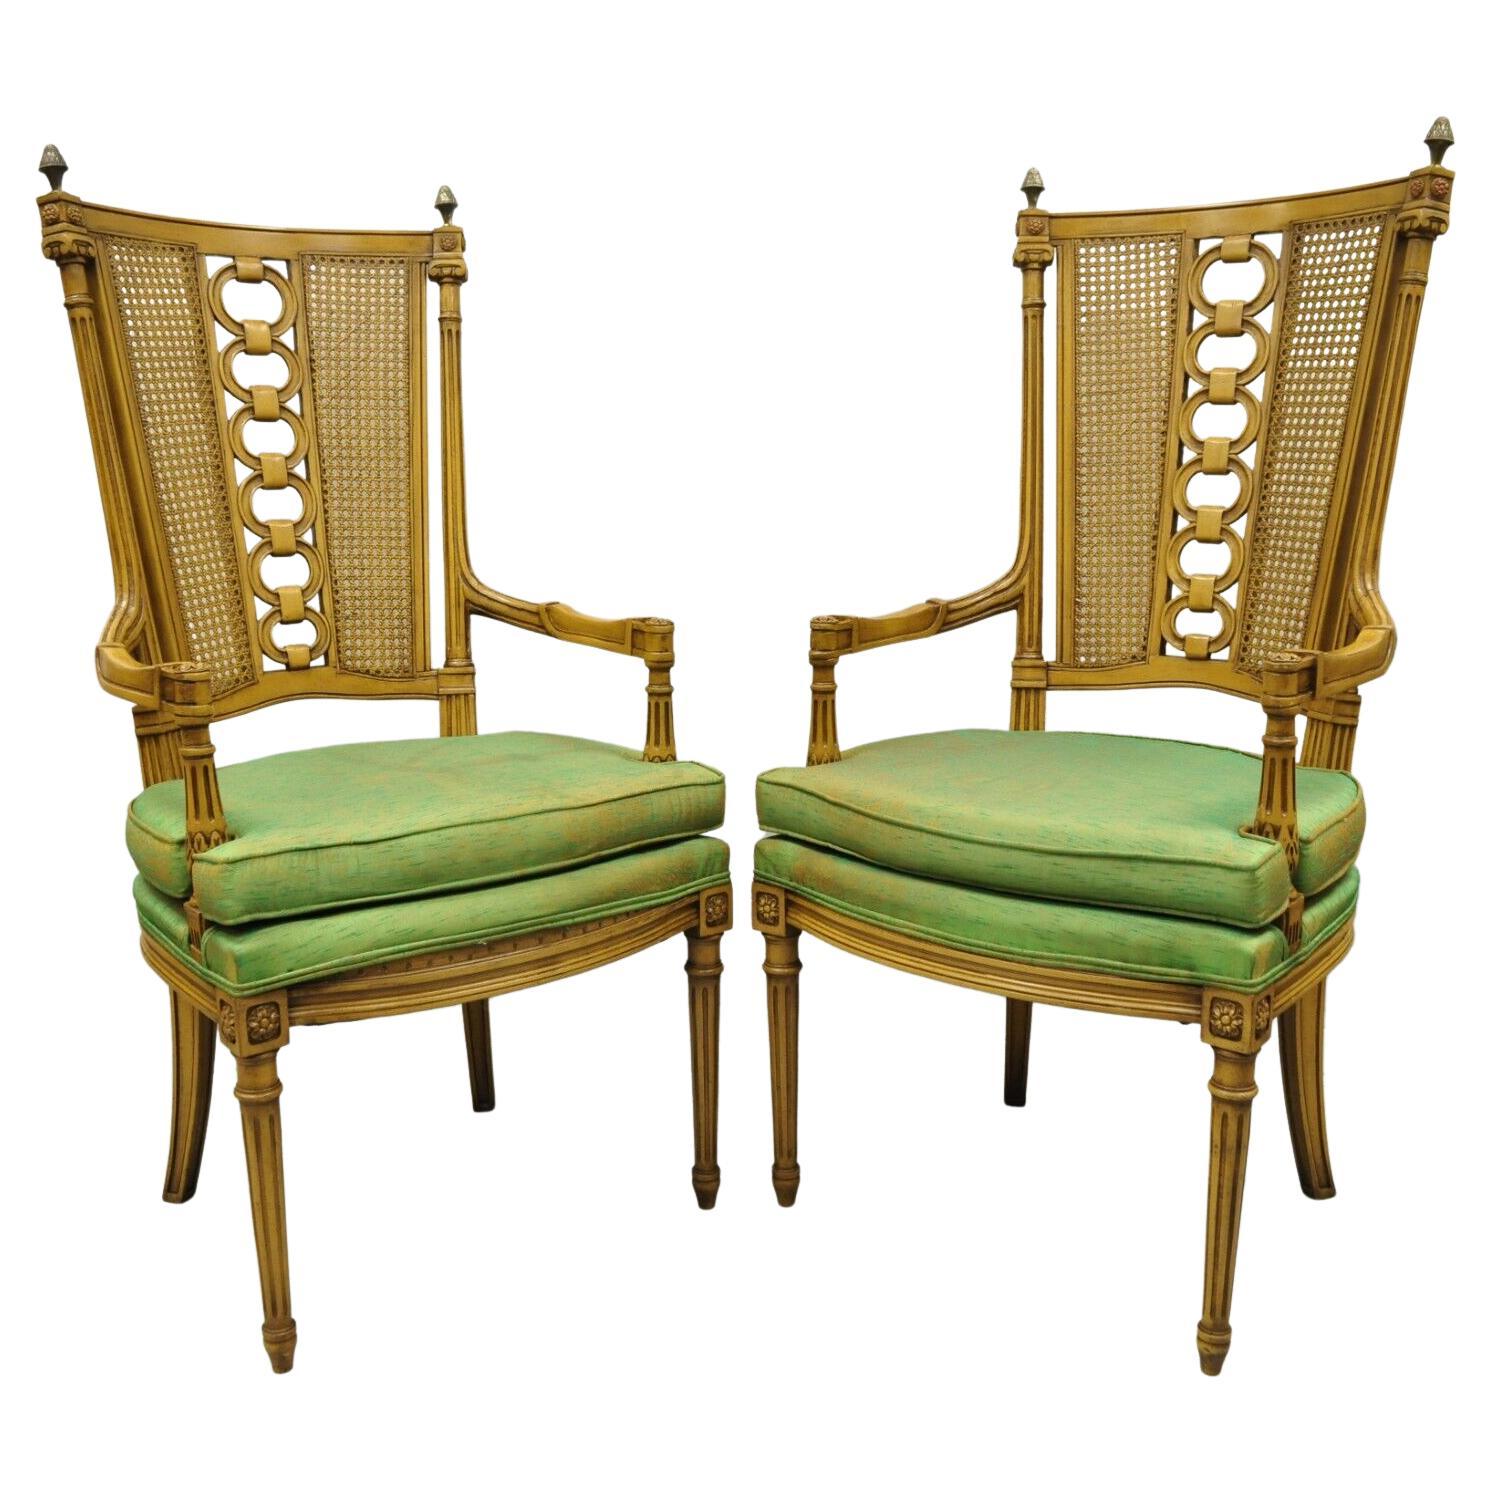 Vintage French Hollywood Regency Tall Cane Back Carved Link Chairs, a Pair For Sale